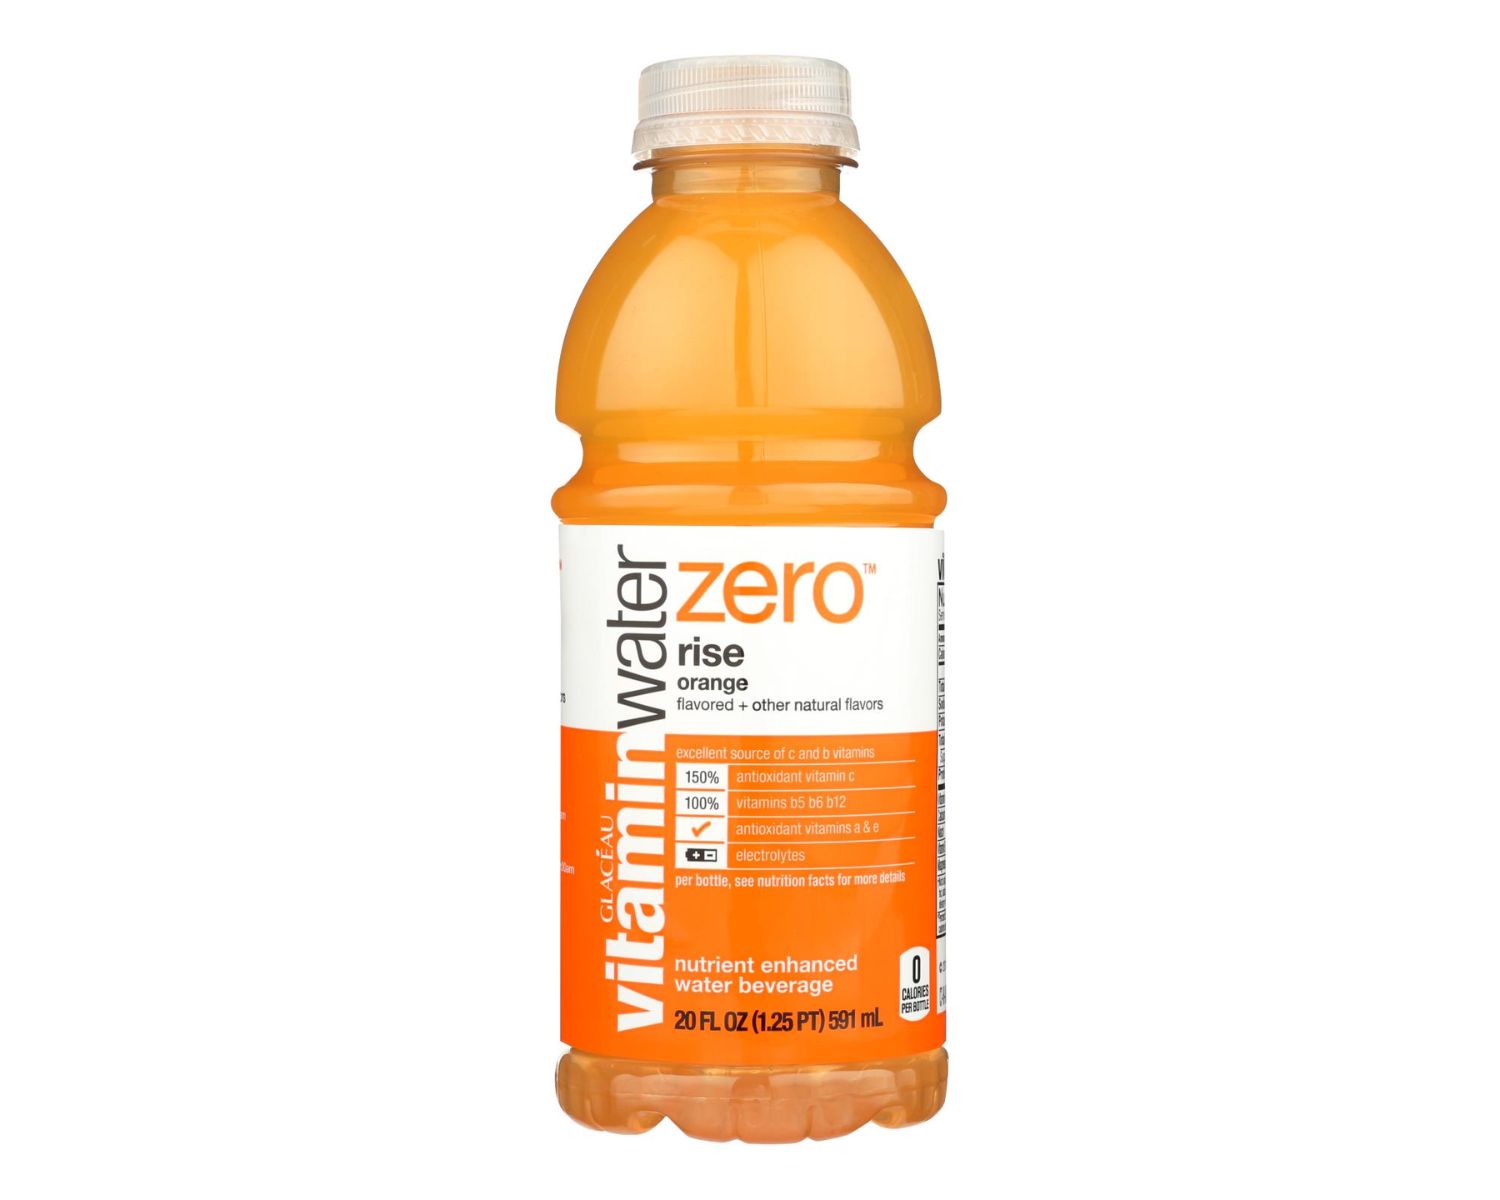 20-glaceau-vitamin-water-zero-nutrition-facts